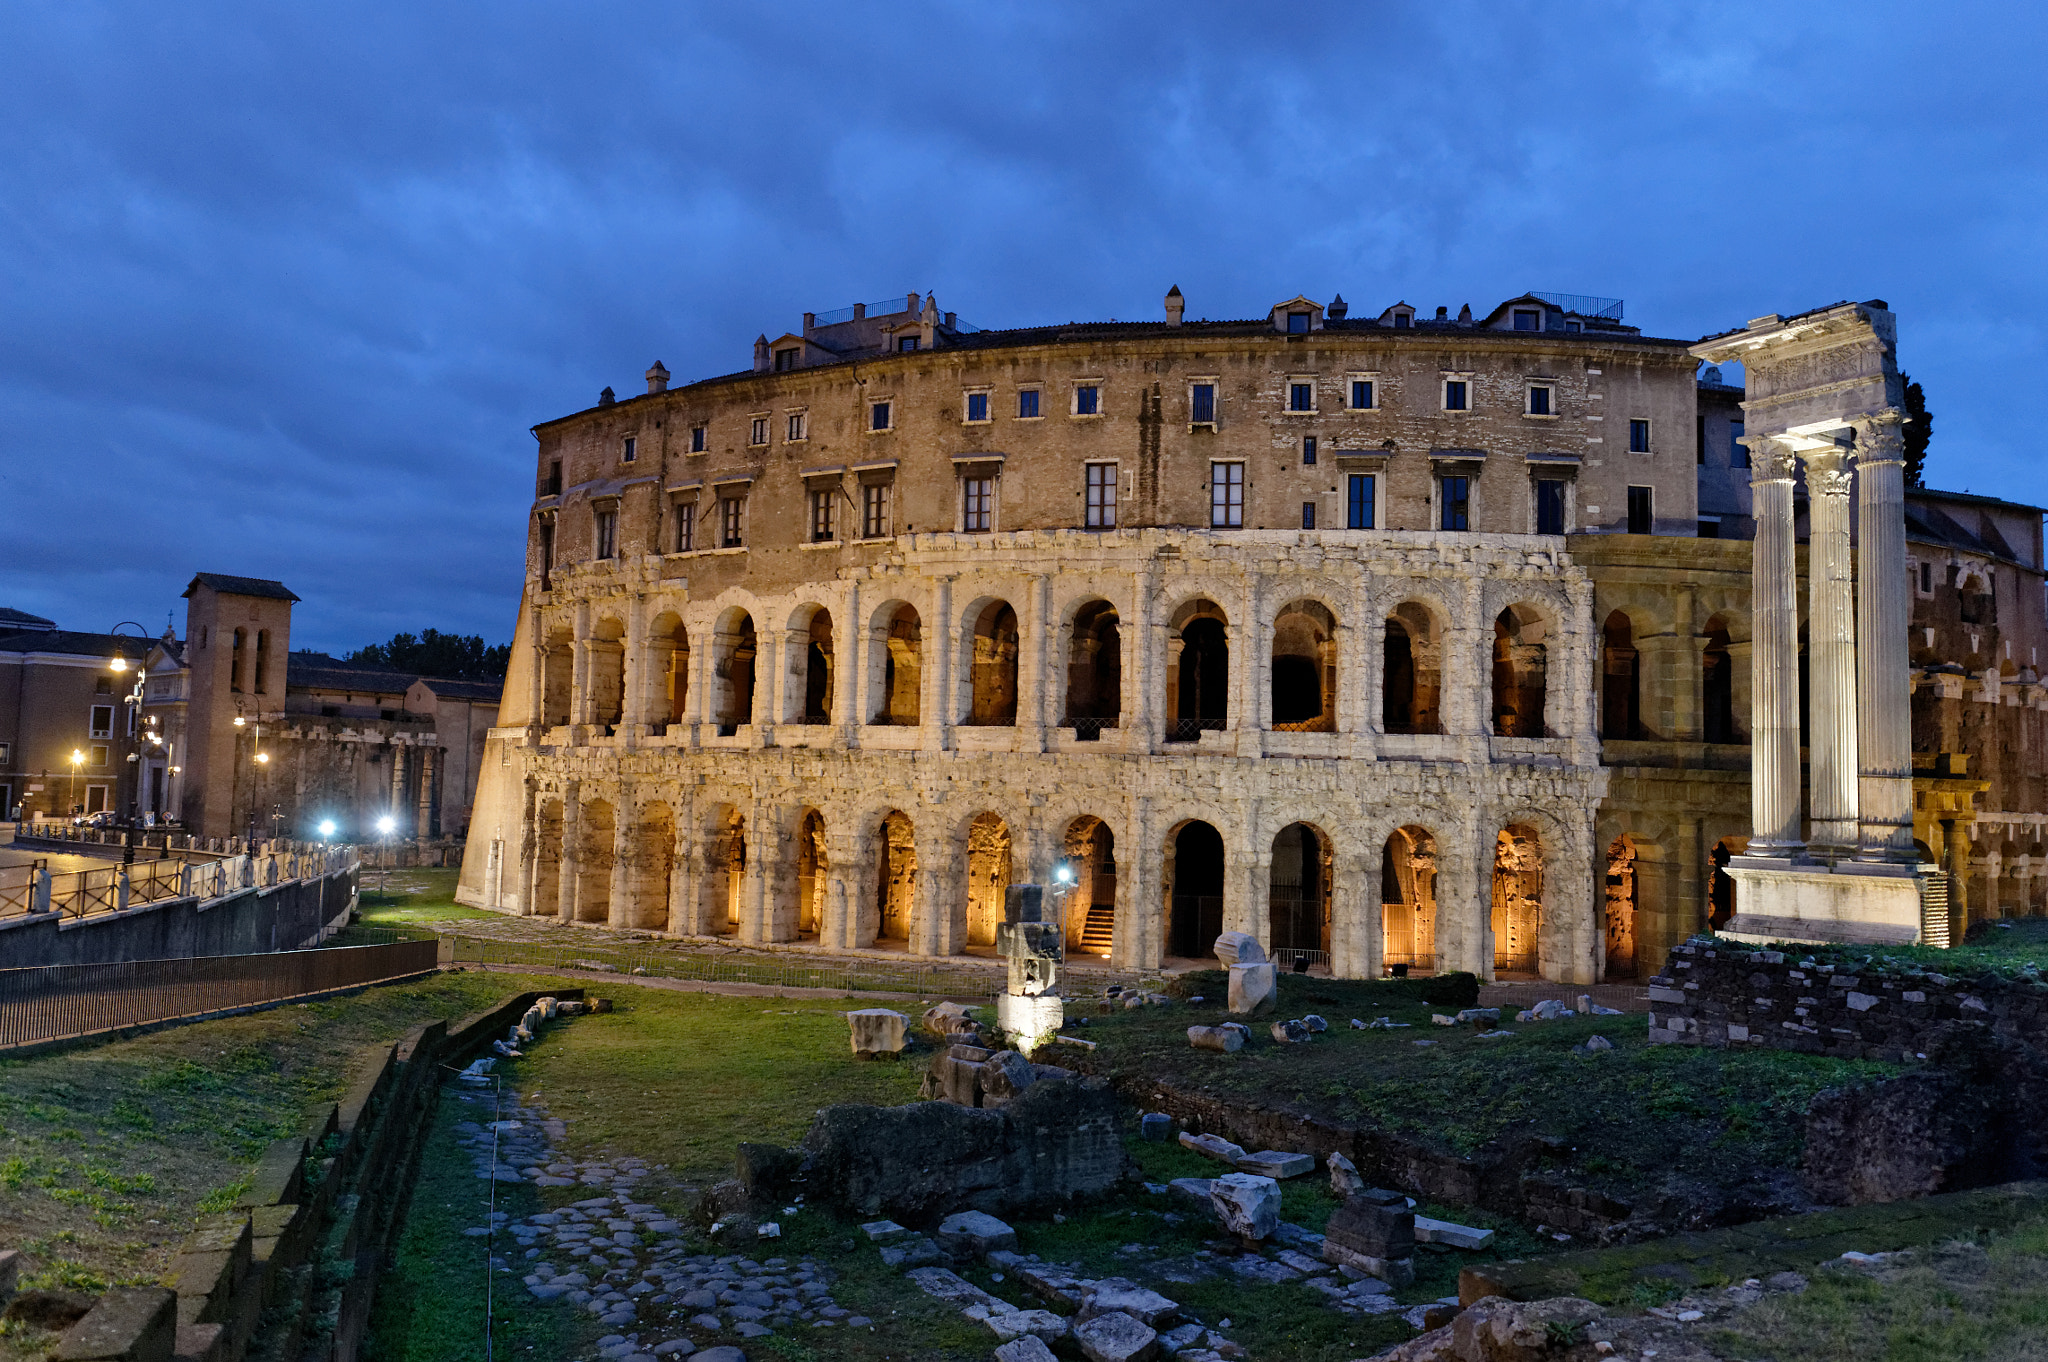 The Theater of Marcellus in Rome